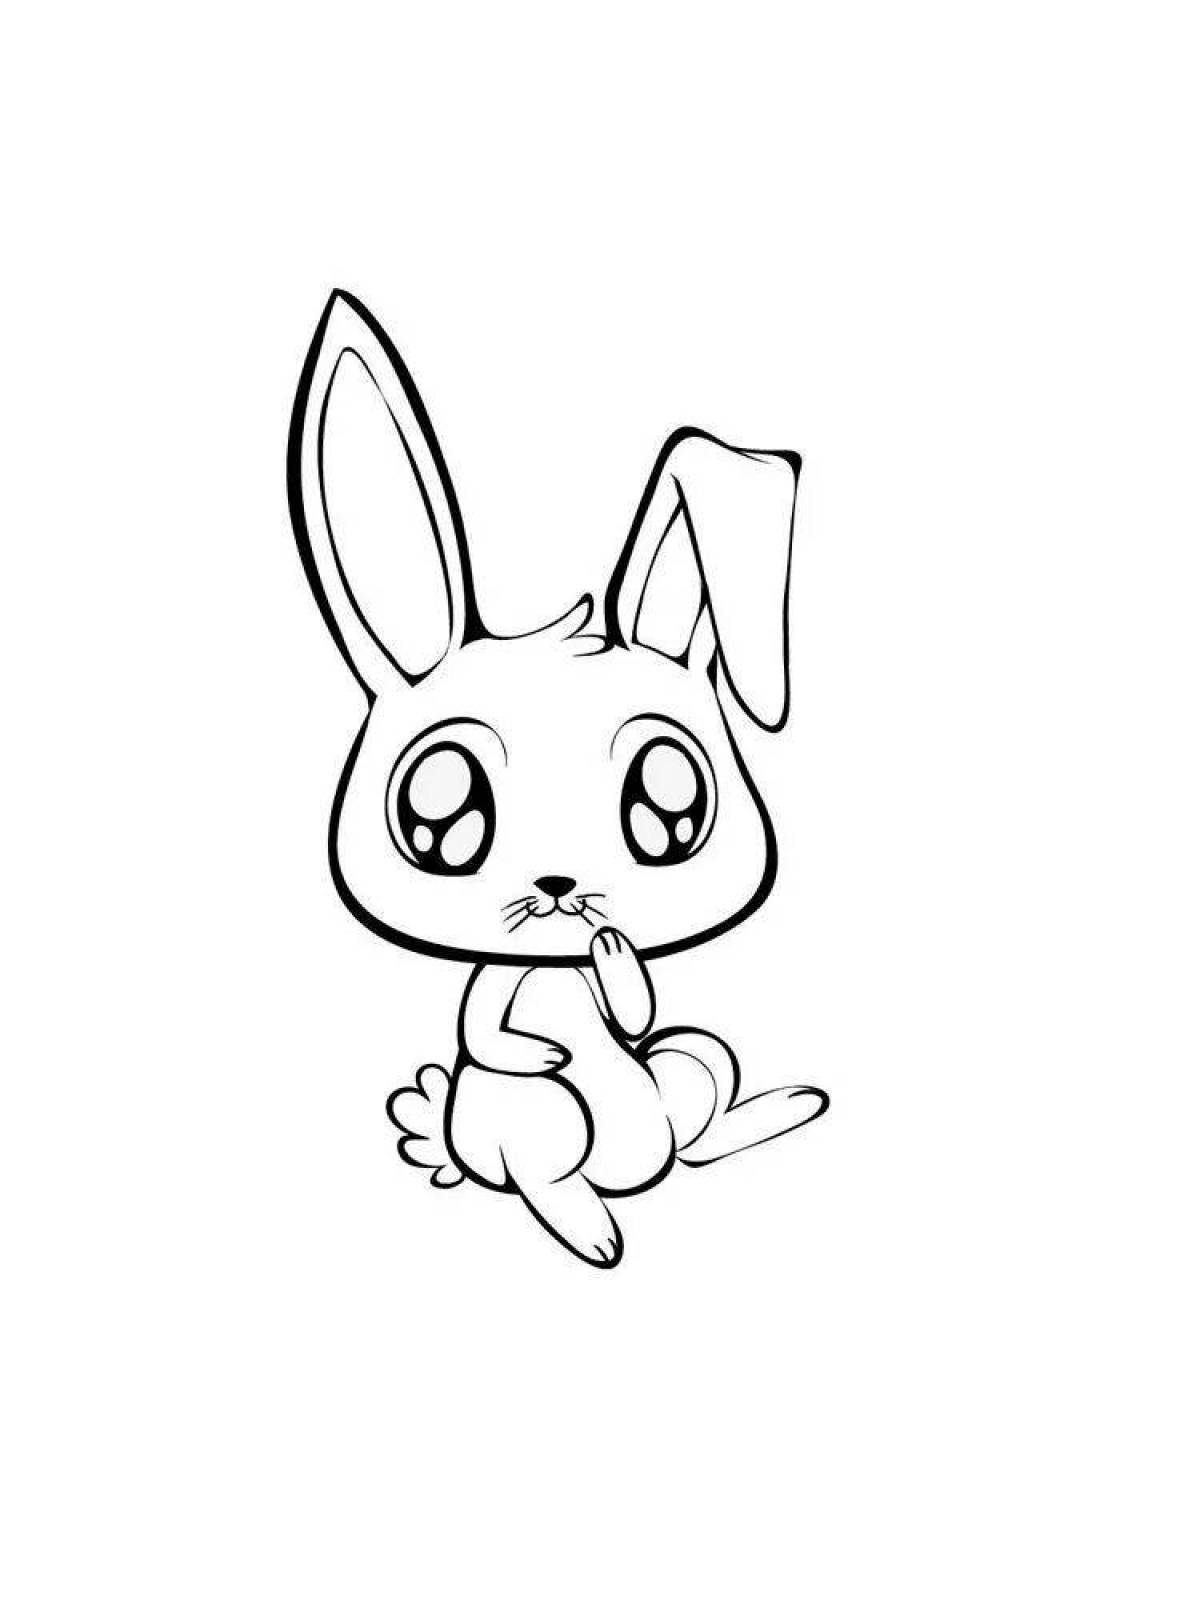 Wiggly little bunny coloring page